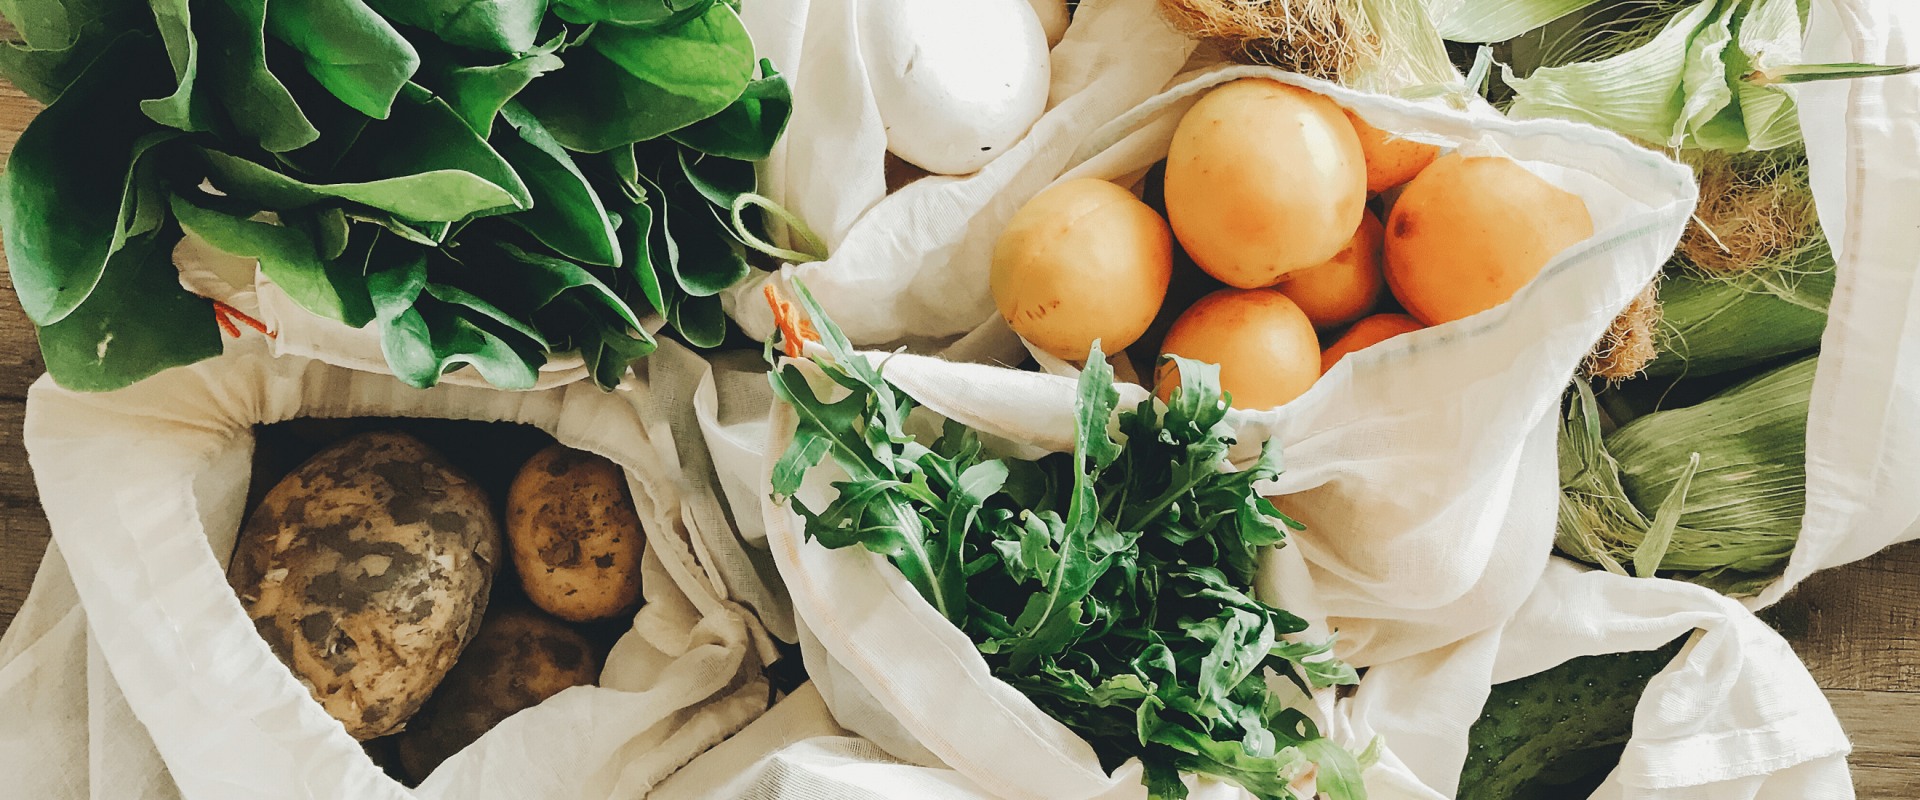 Sustainable Grocery Shopping: How to Reduce Plastic Waste While Shopping